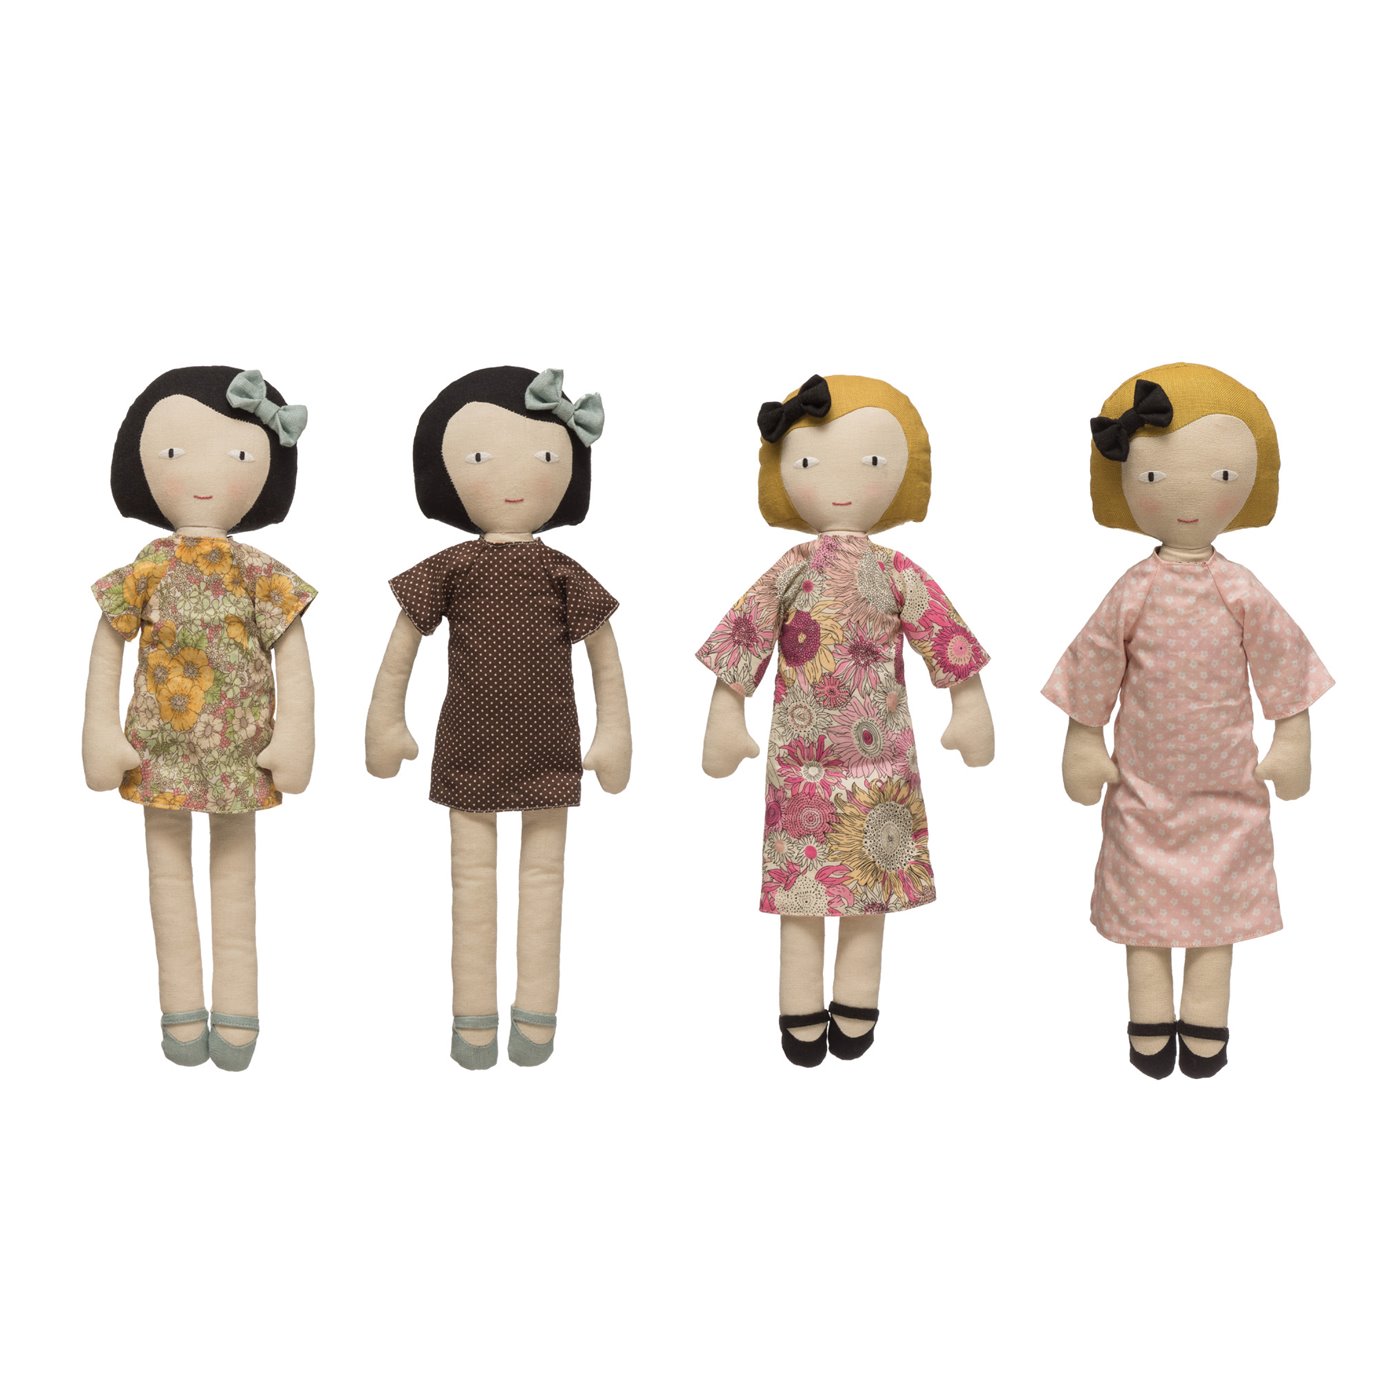 Plush Fabric Girl Doll with Reversible Dress (Set of 2 Styles)